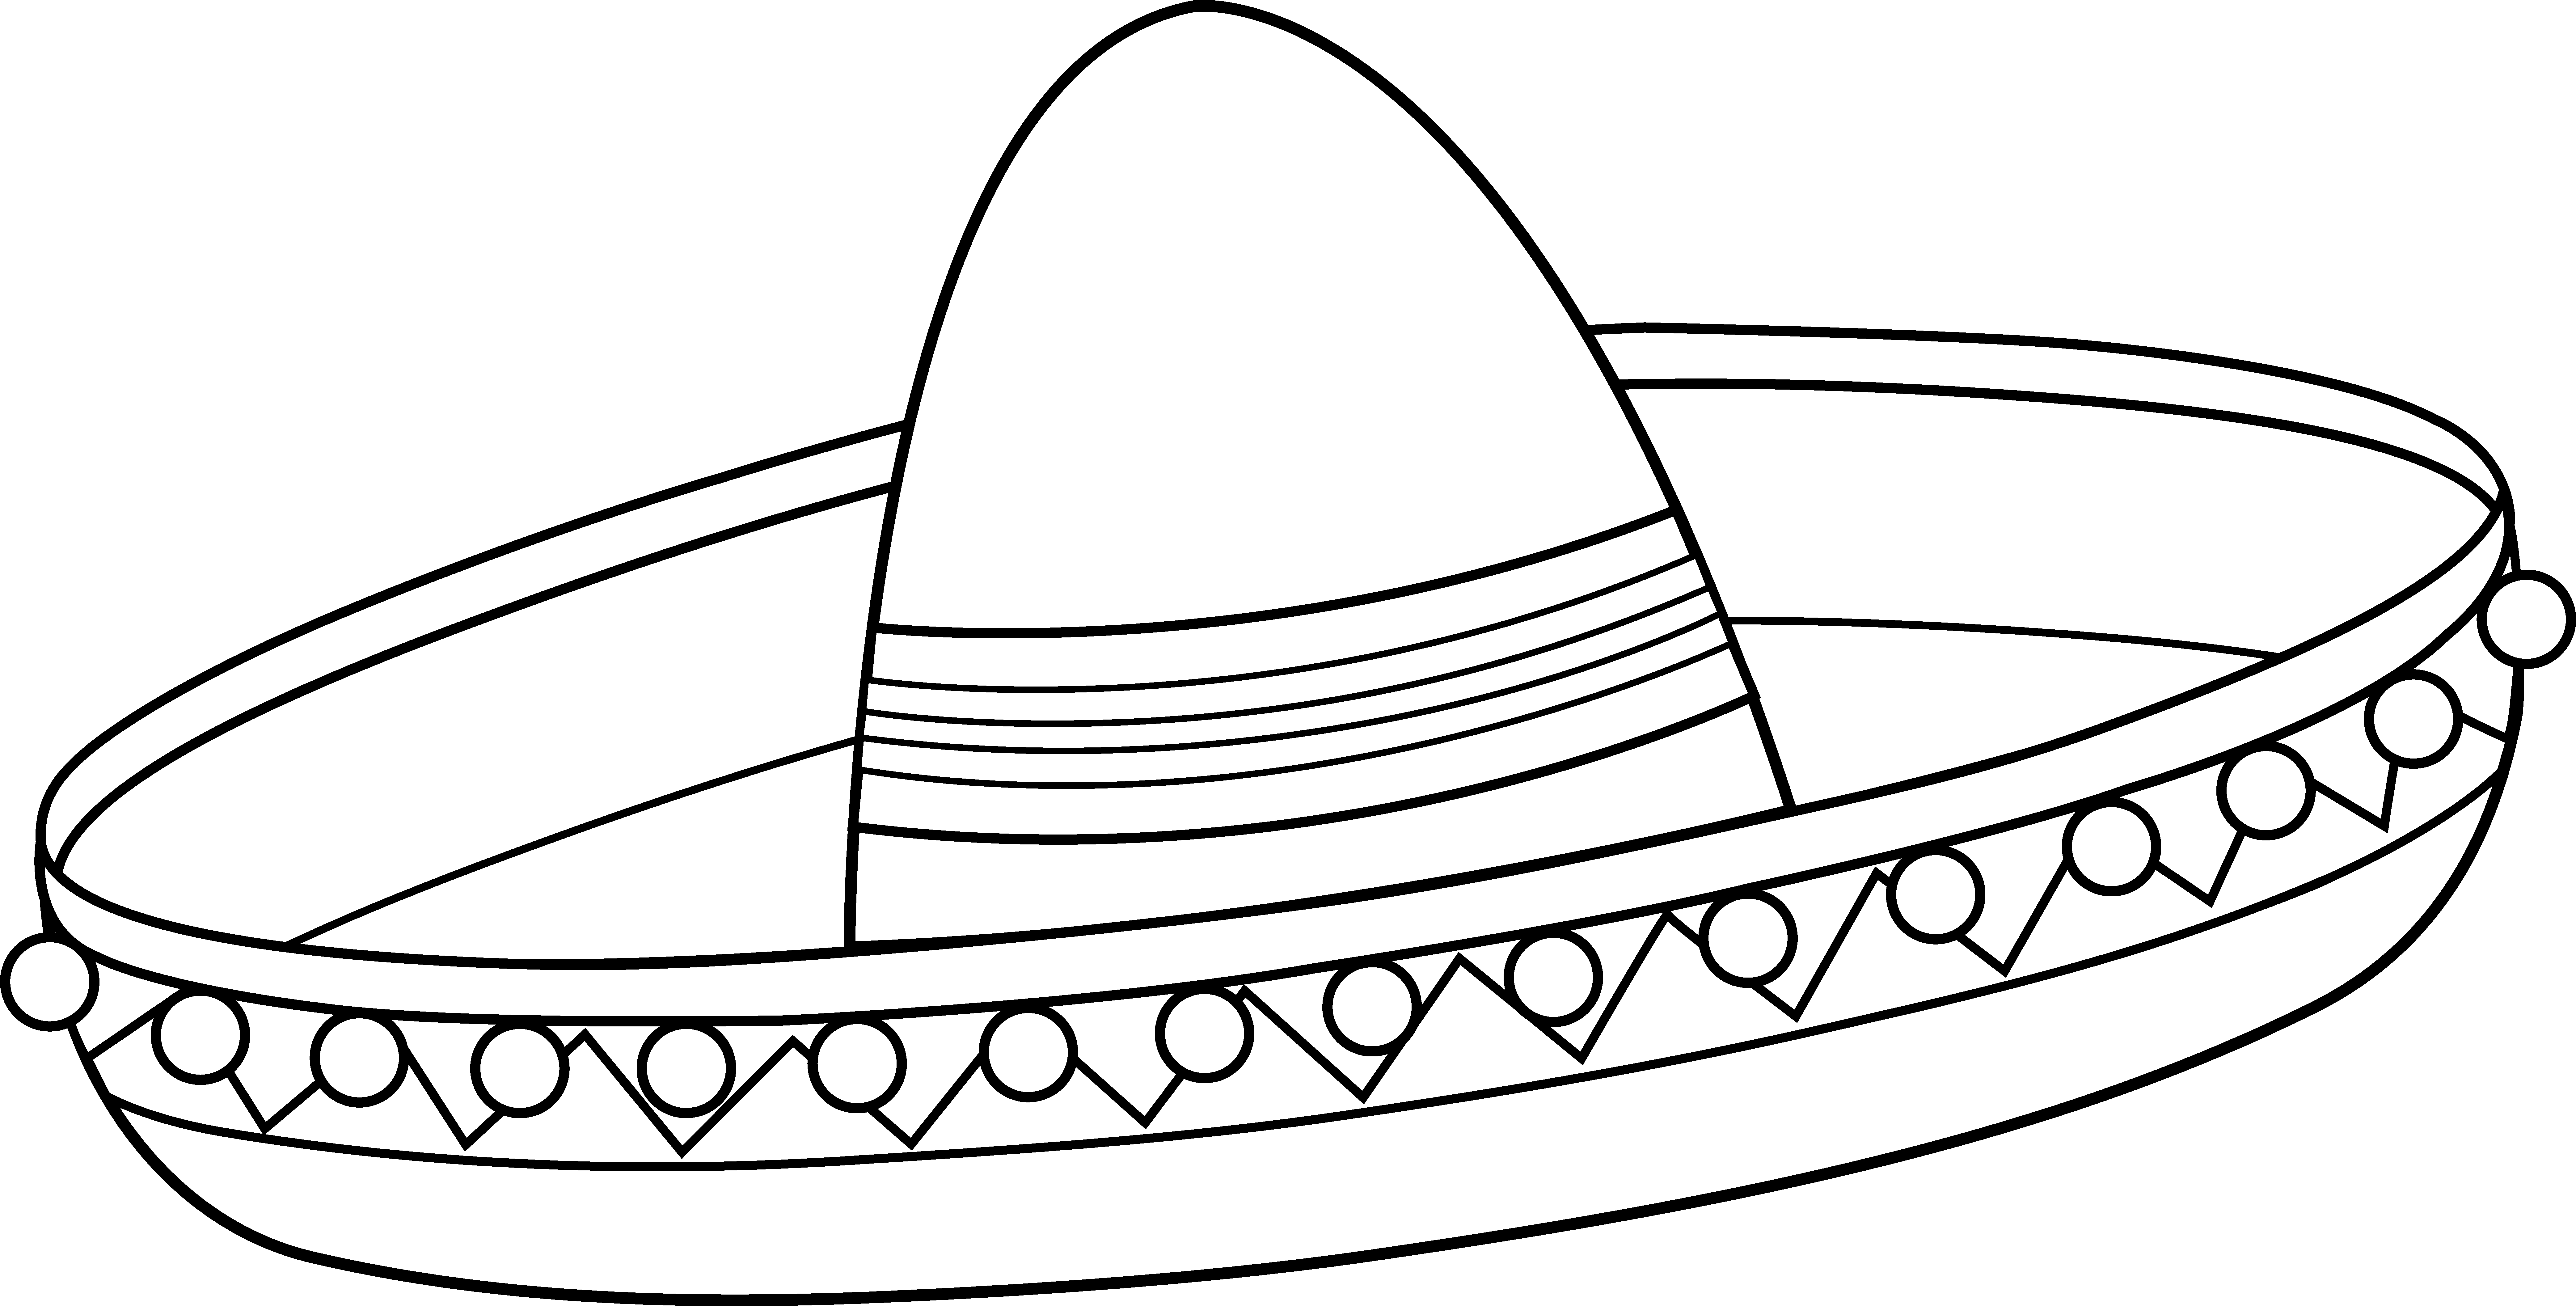 Pictures Of Mexican Hats Cliparts.co